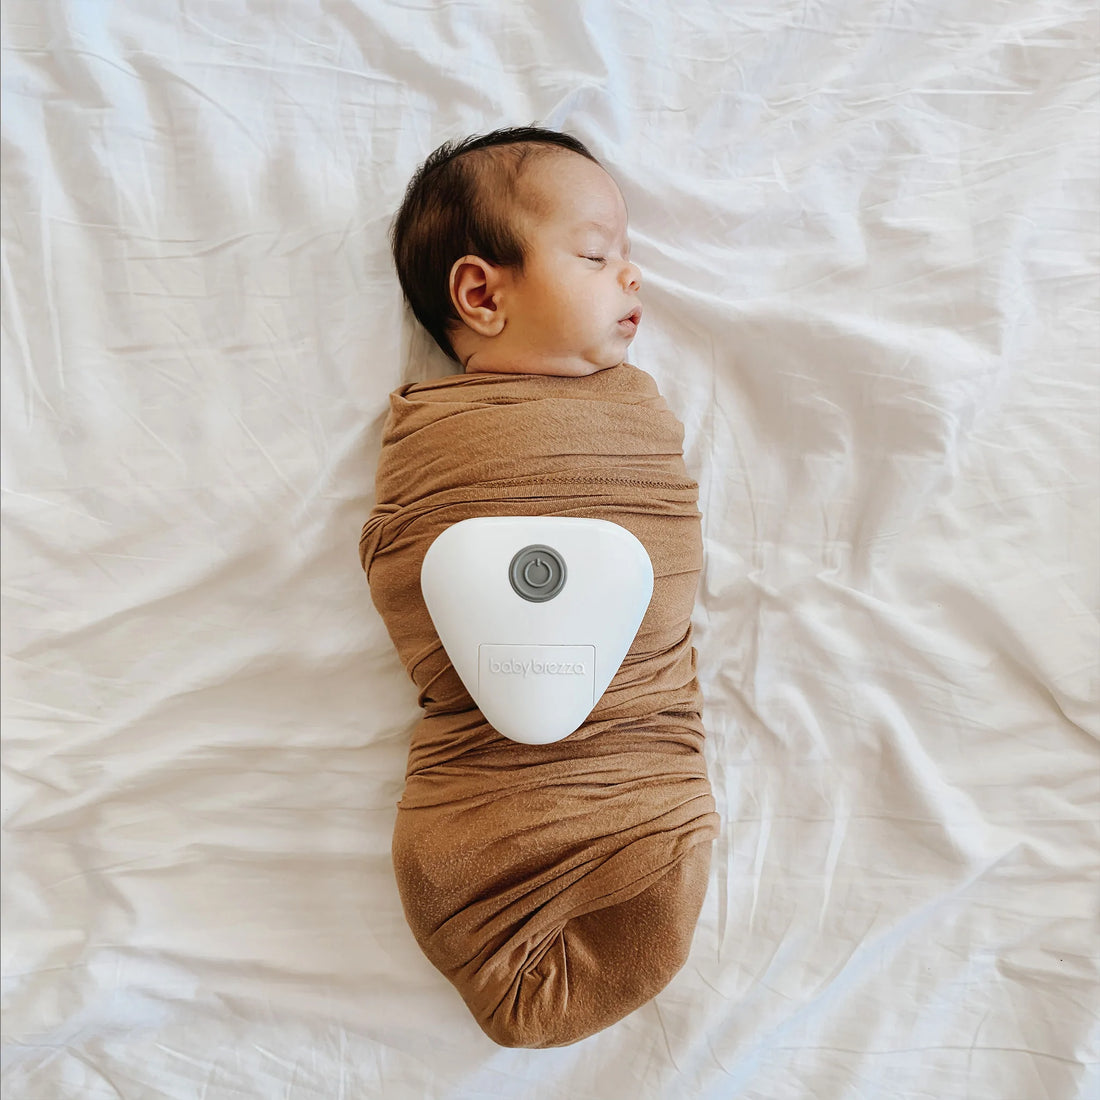 Baby soothe massager - not just for your baby!